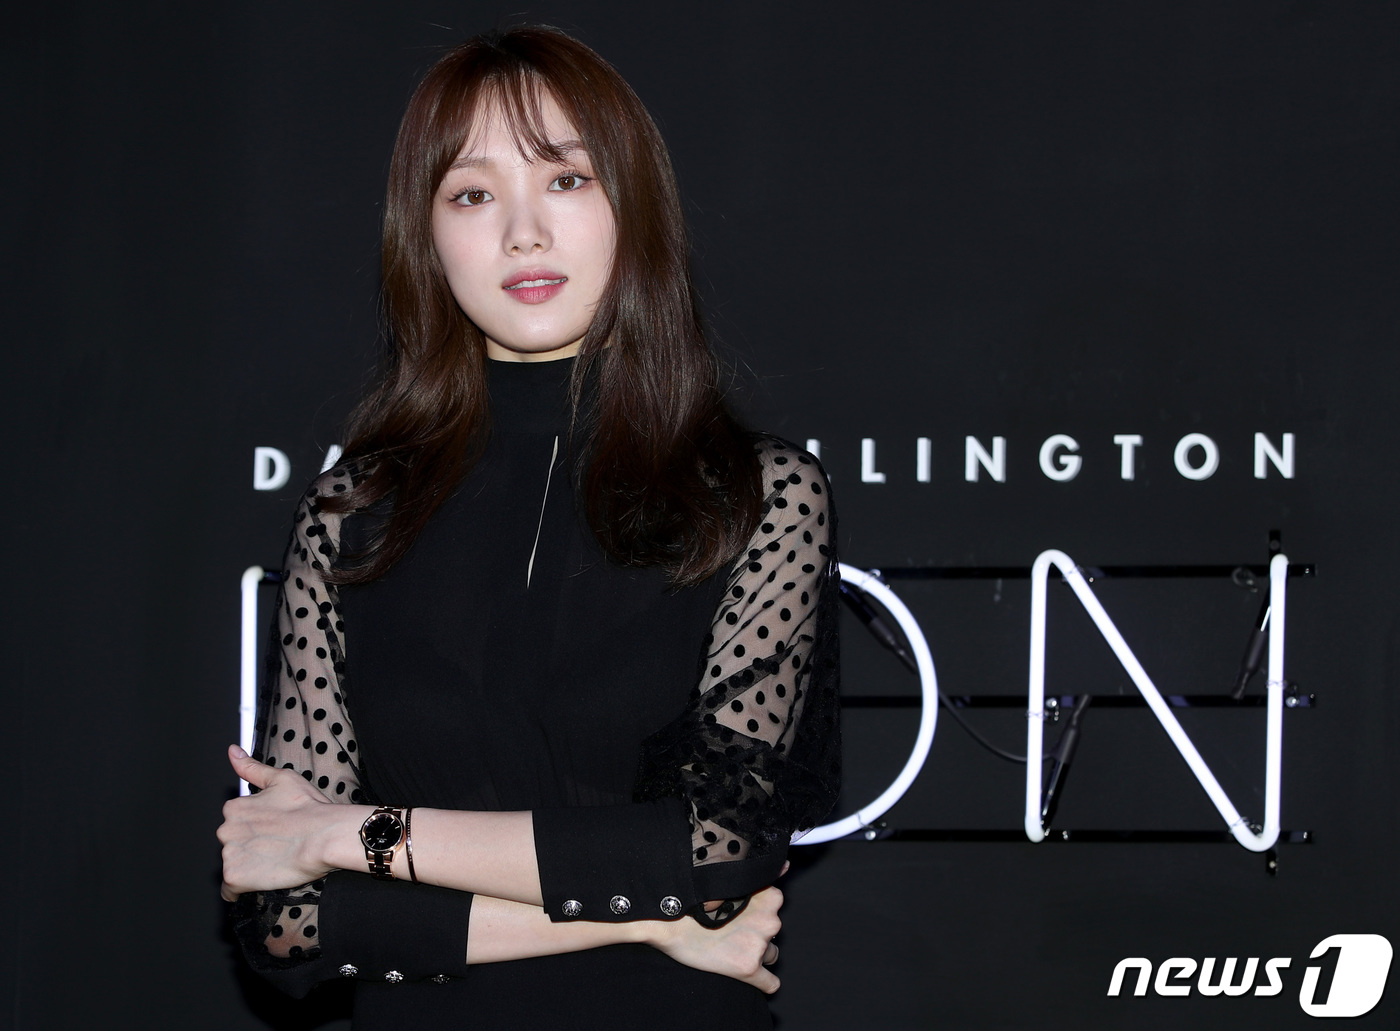 Seoul=) = Actor Lee Sung-kyung poses at the Sweden watch and accessory brand Daniel Wellington (DANIEL WELLINGTON) photo event at the Seoul Samcheong Flagship Store on Thursday afternoon.October 17, 2019